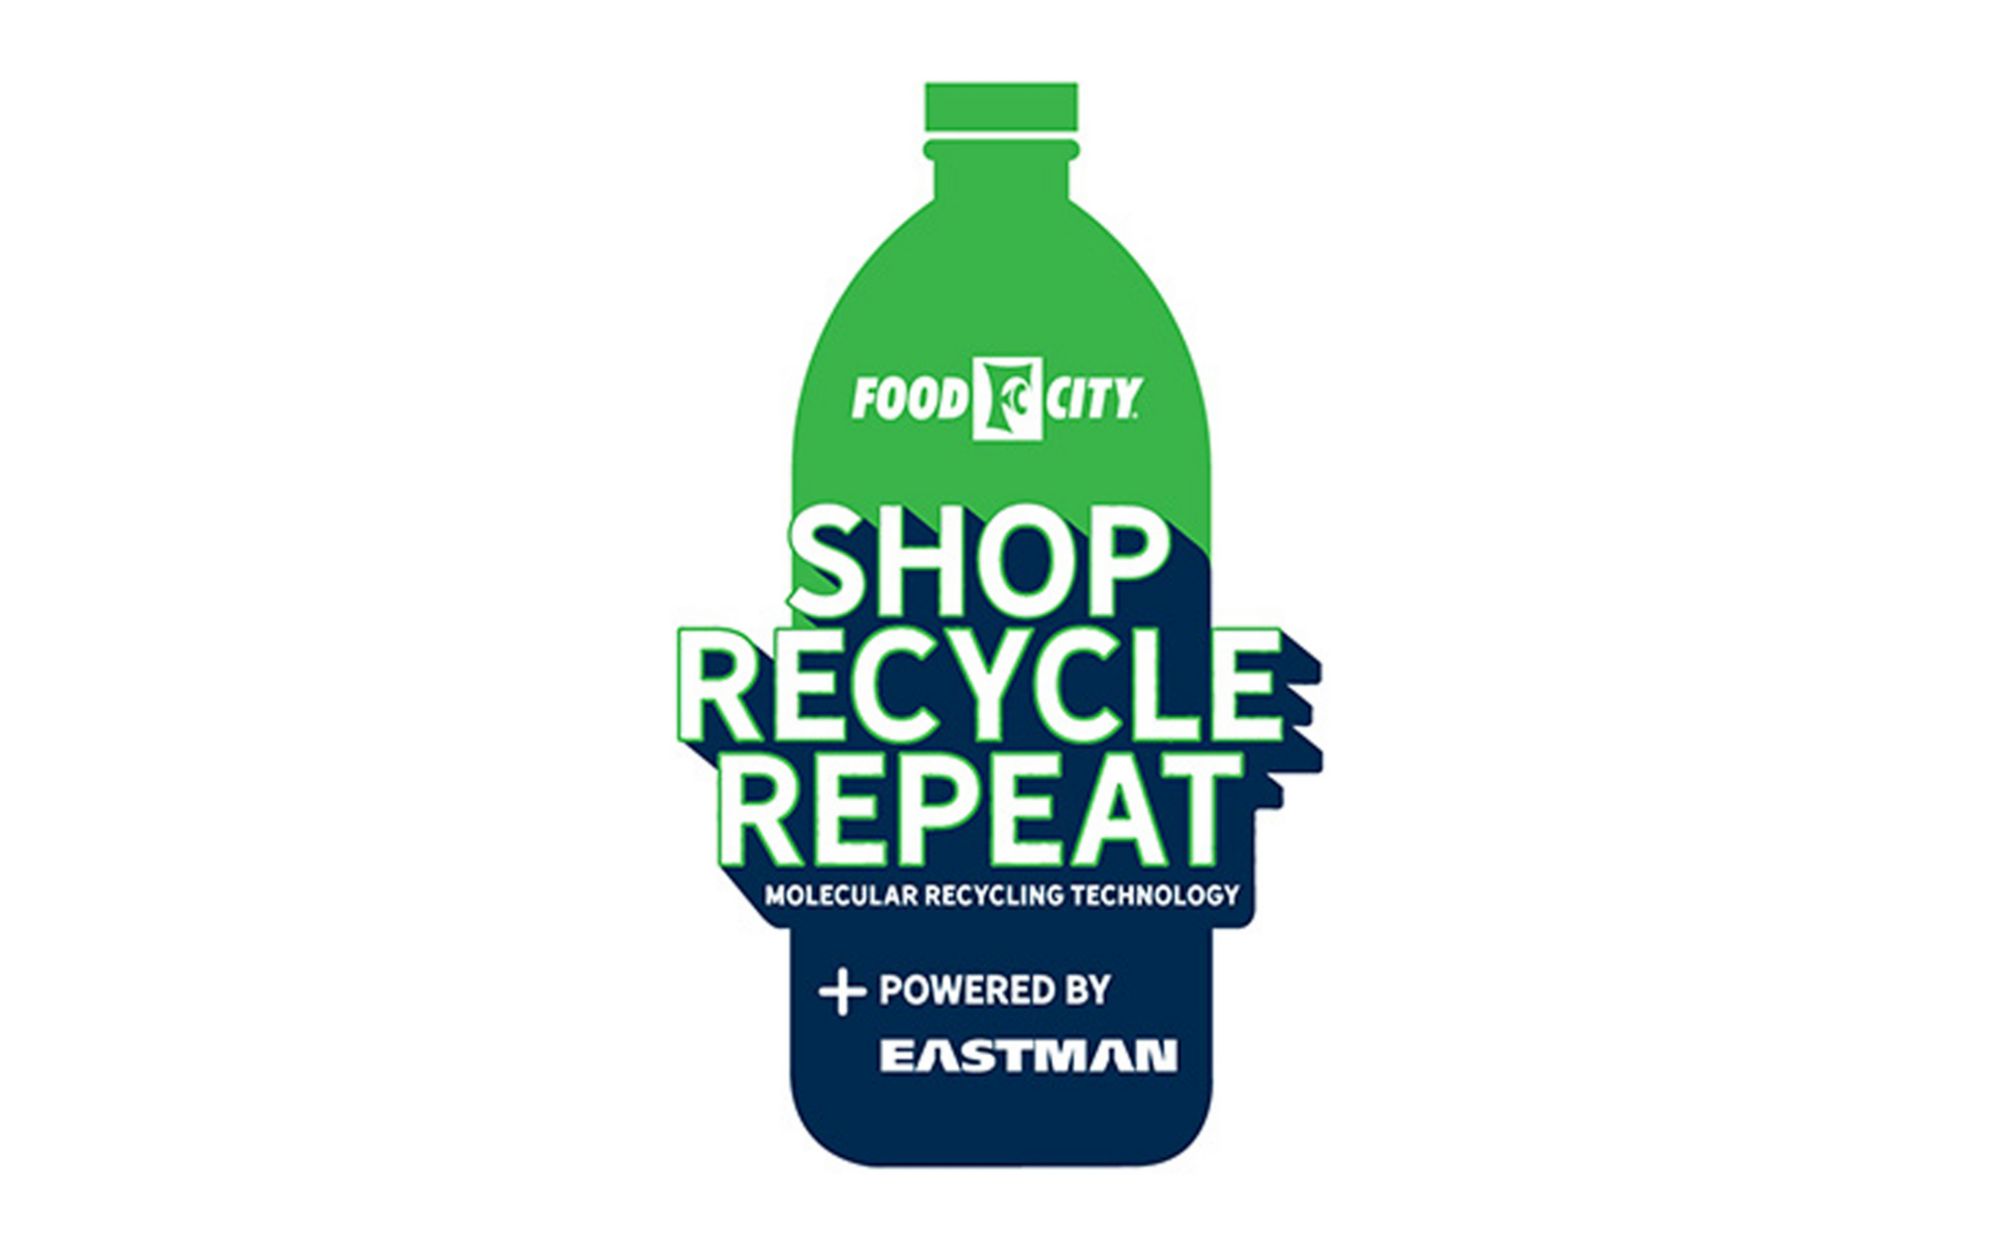 A Food City and Eastman logo of a bottle with the message Shop Recycle Repeat logo 